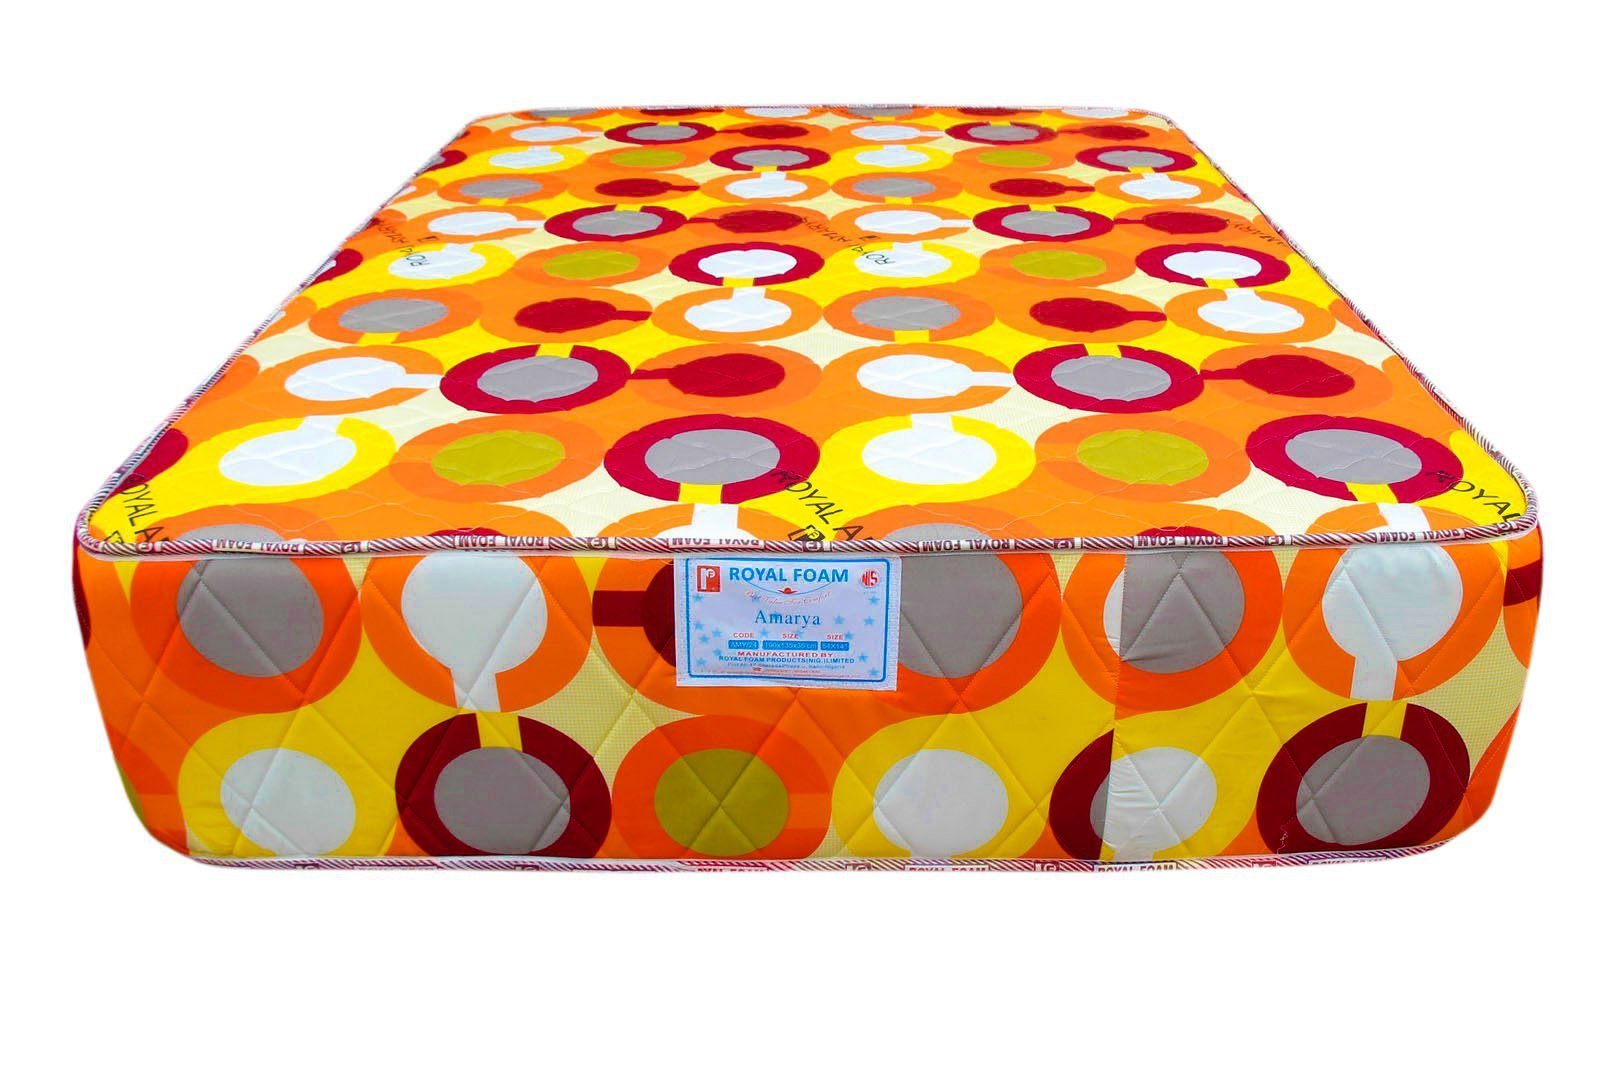 Royal Amarya-Poly Cotton Fabric - 14 Density foam - Fully Quilted Mattress -190X75X15 [75 X 30 X 6''] [6ft X 2.5ft X 6inches]